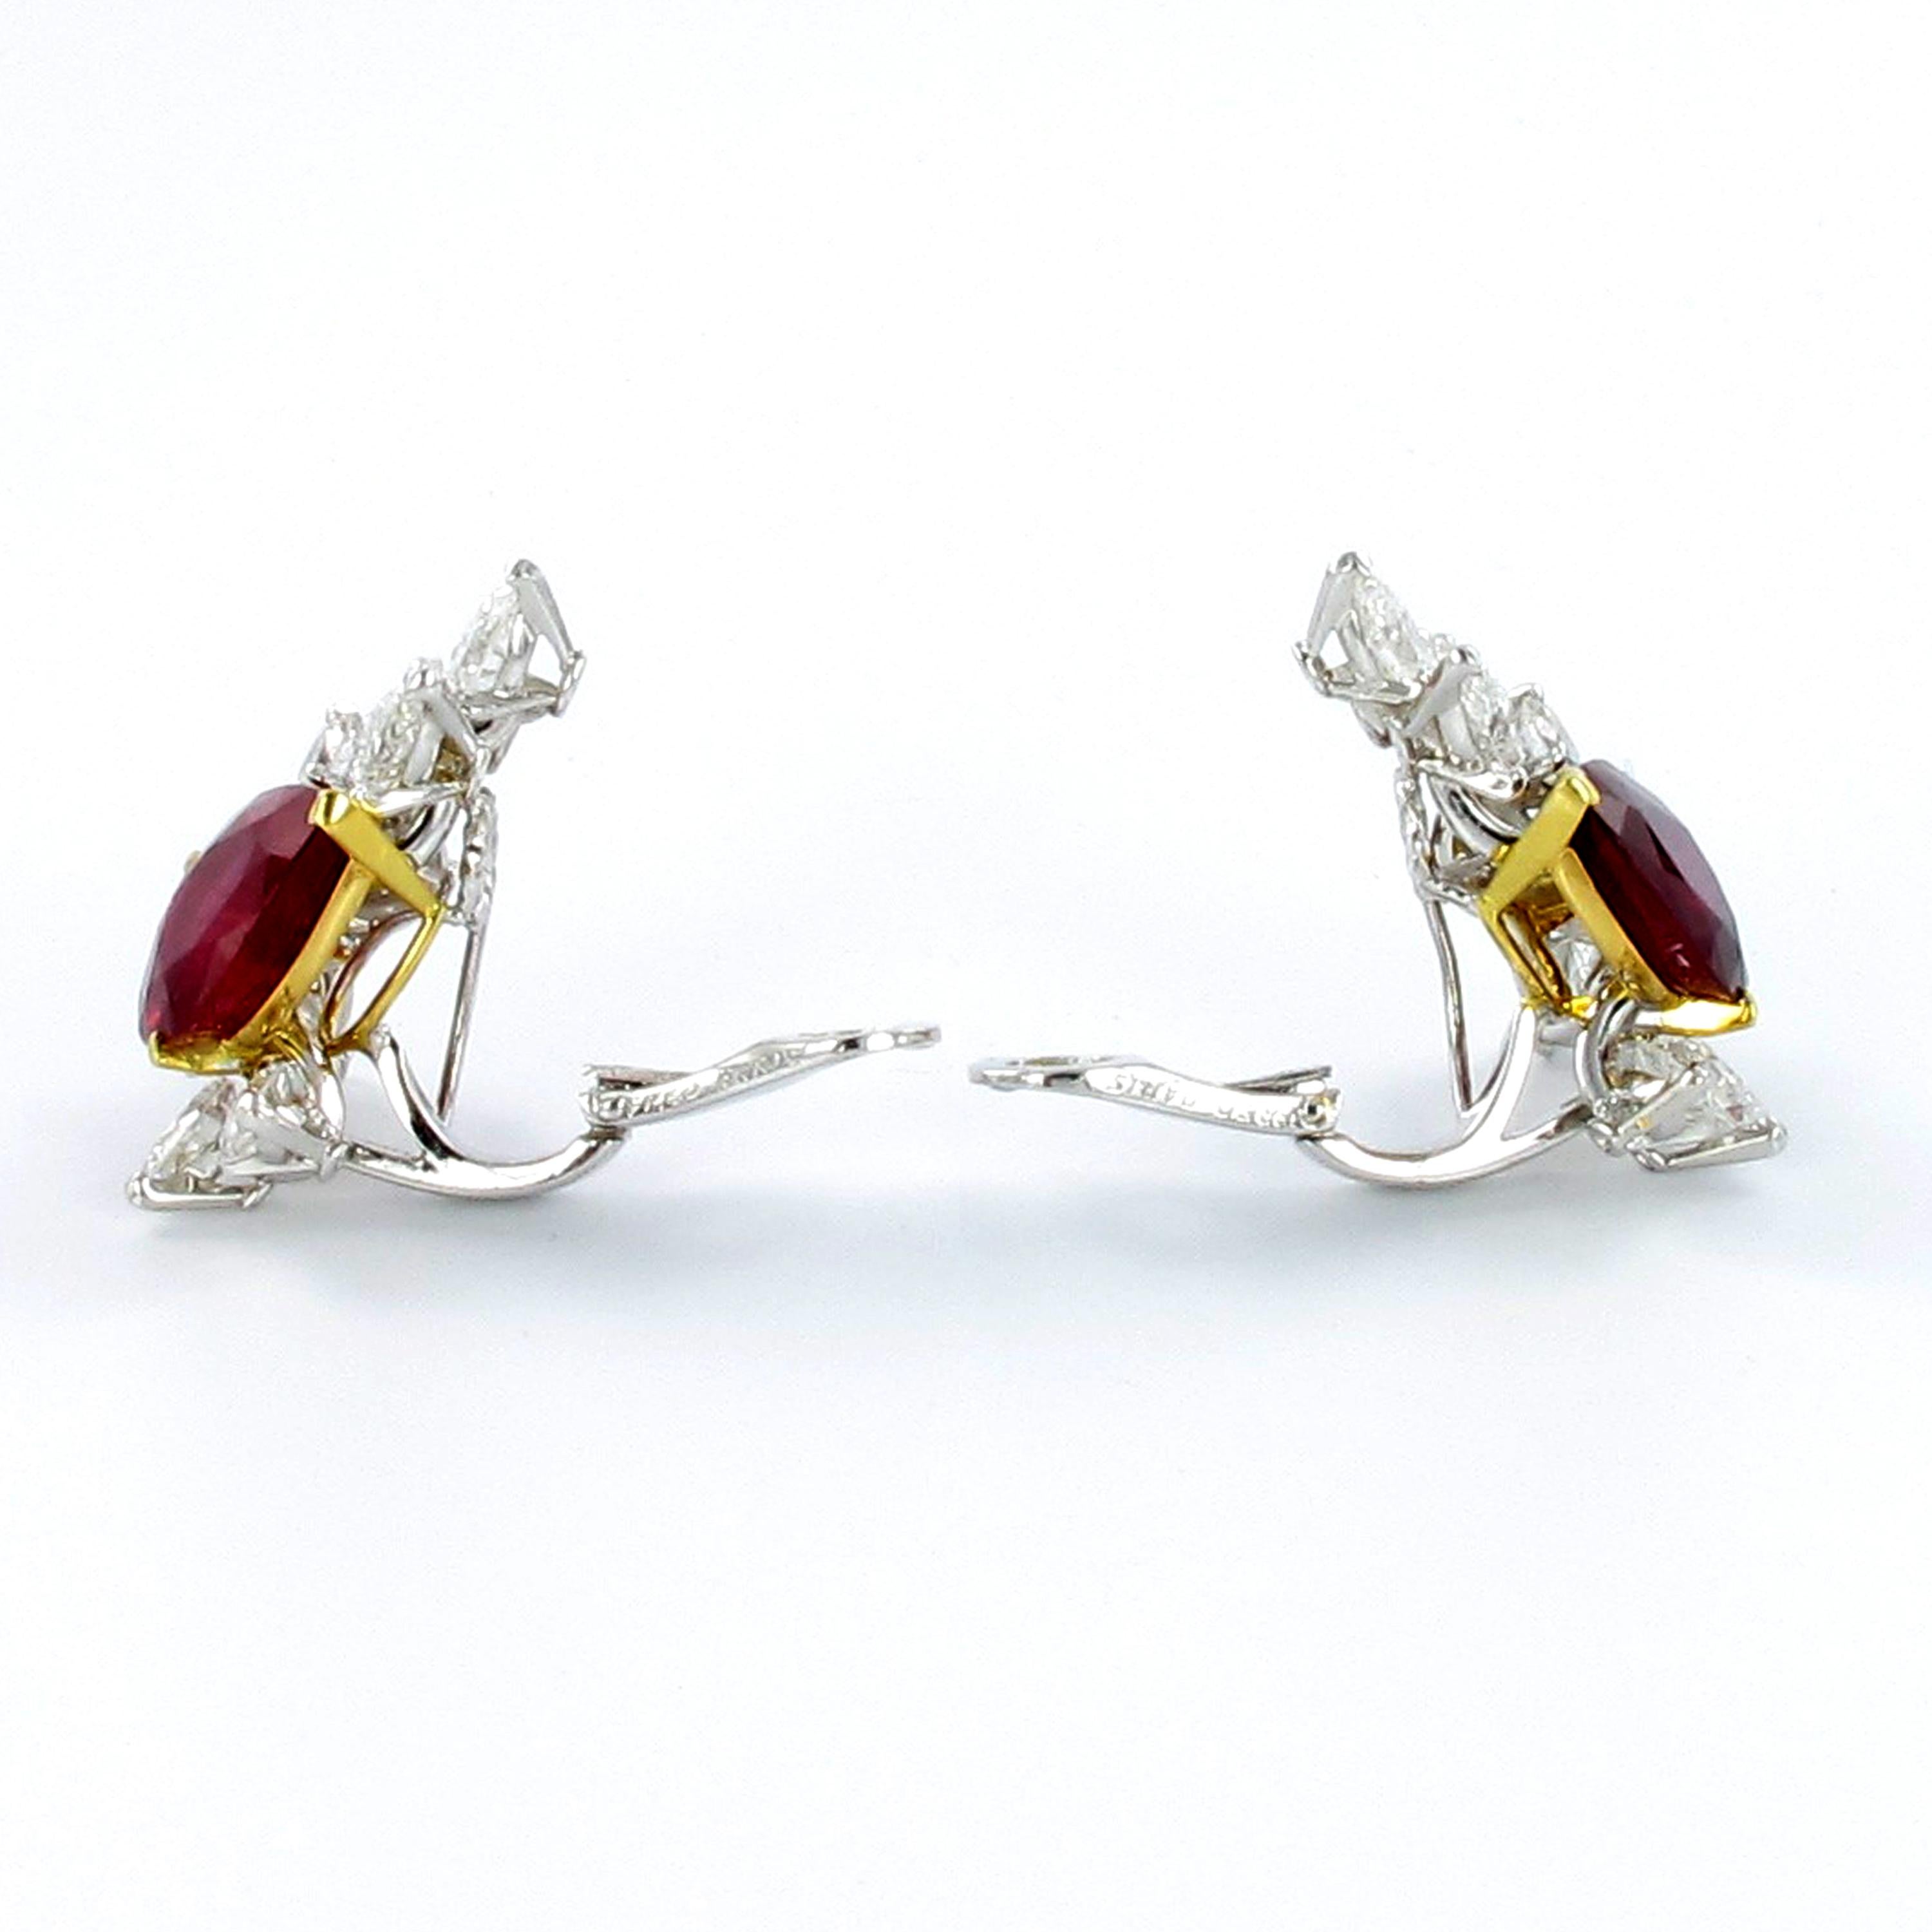 Spectacular Pair of Ruby and Diamond Ear Clips by FRED 1